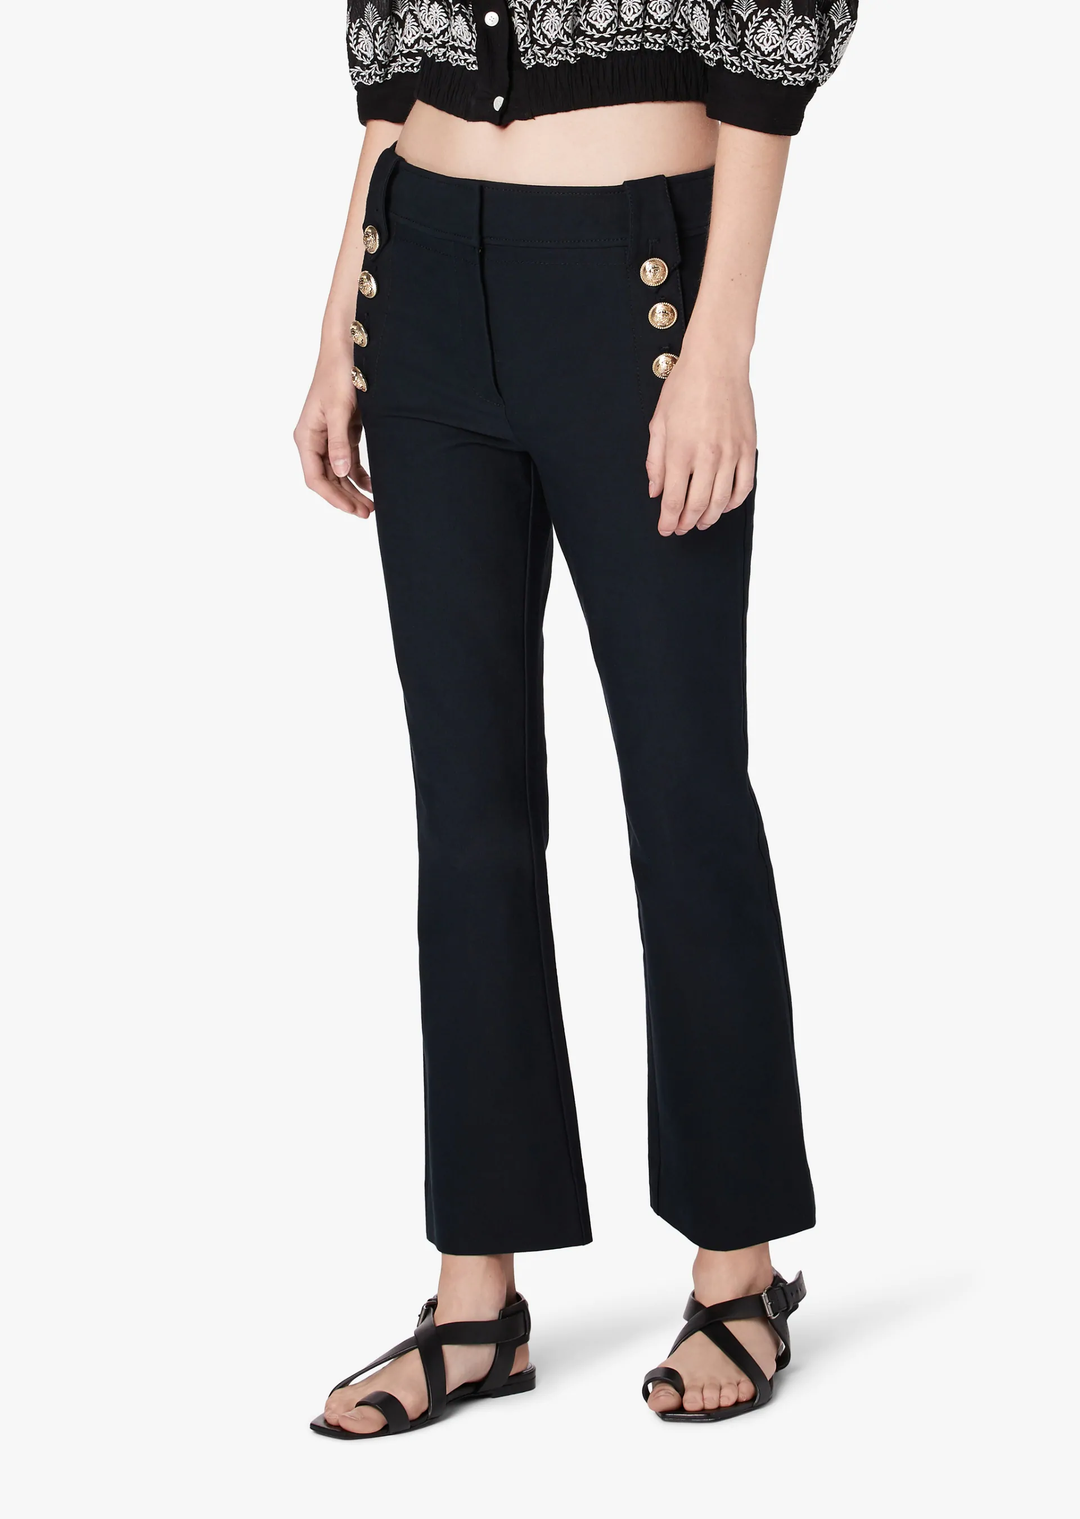 Derek Lam 10 Crosby - Robertson Cropped Flare Trouser w/ Sailor Buttons in Midnight